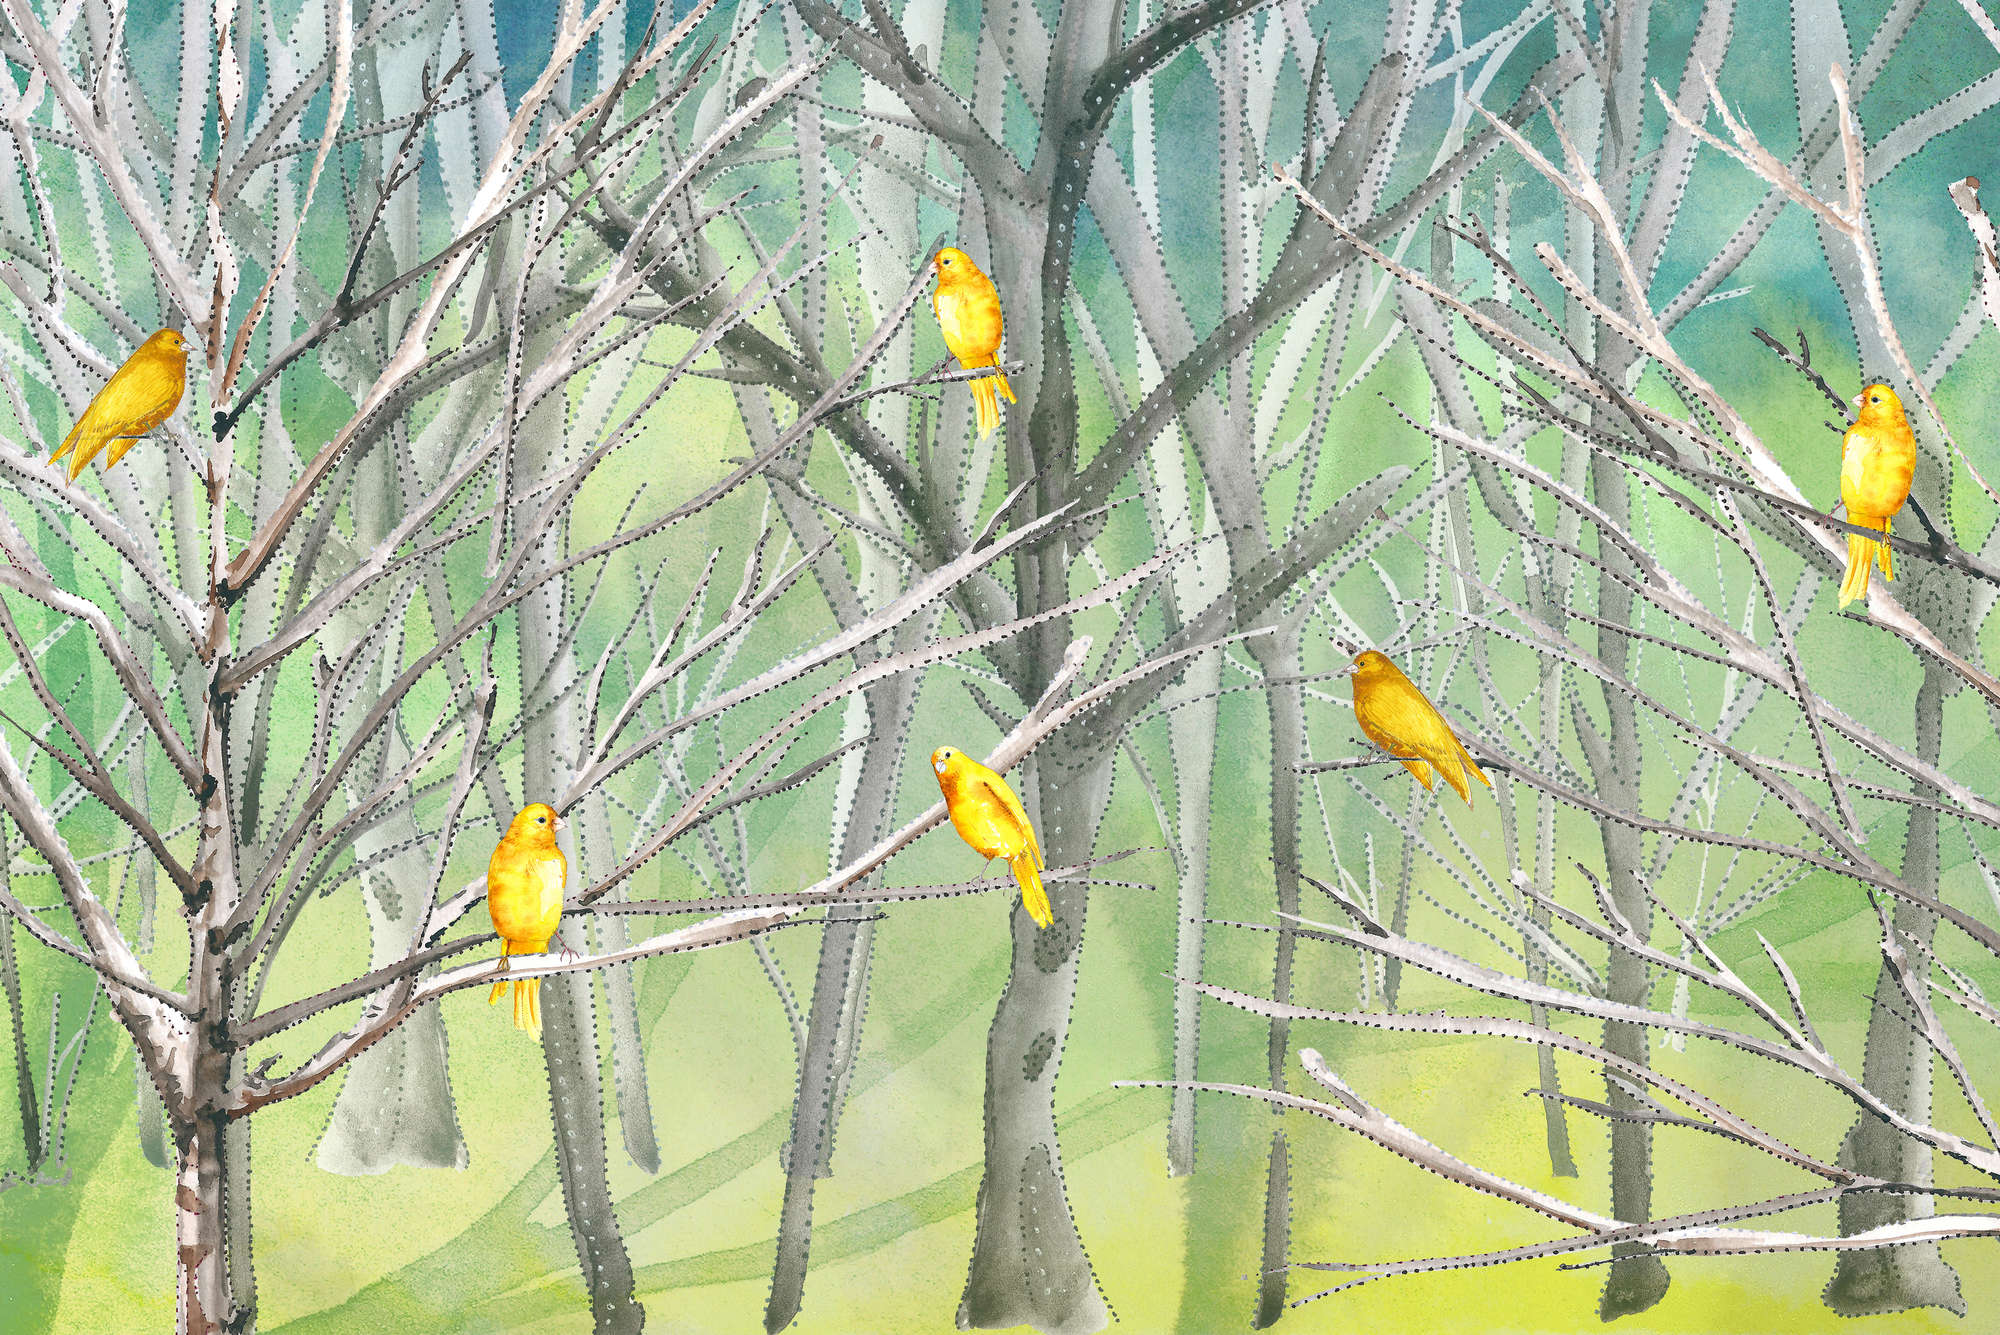             Forest mural with birds in blue and yellow on premium smooth vinyl
        